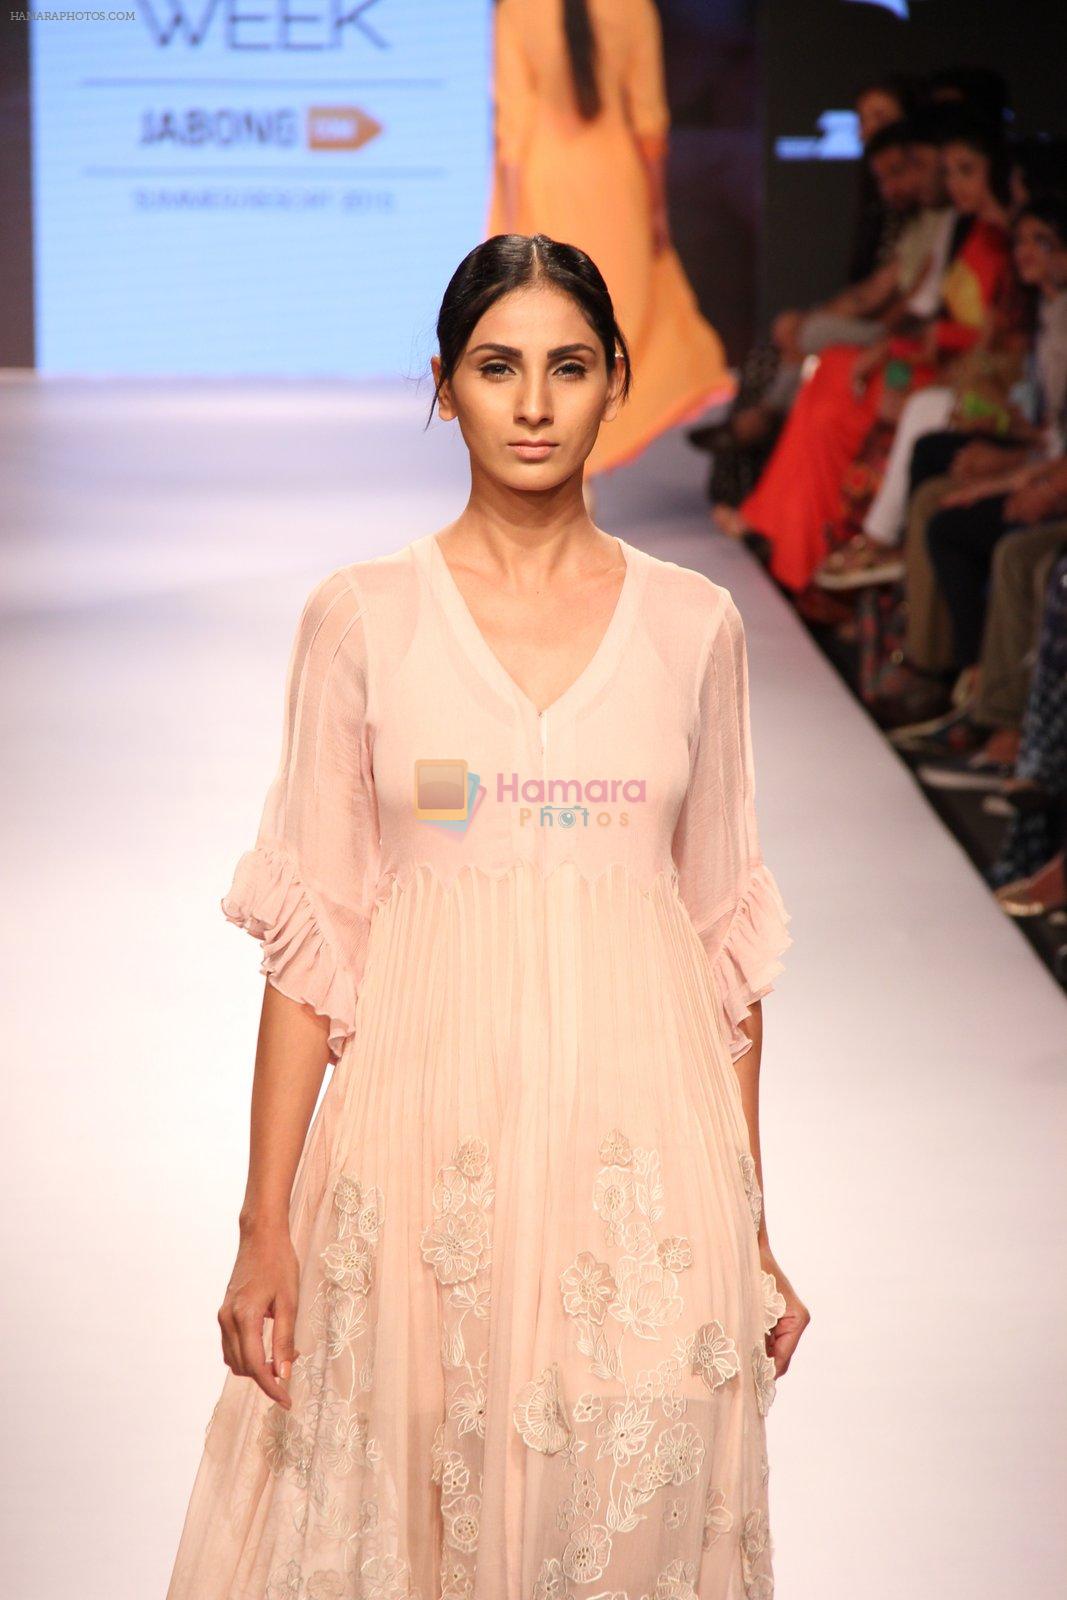 Model walks the ramp for Verb by Pallavi Singhee at Lakme Fashion Week 2015 Day 1 on 18th March 2015